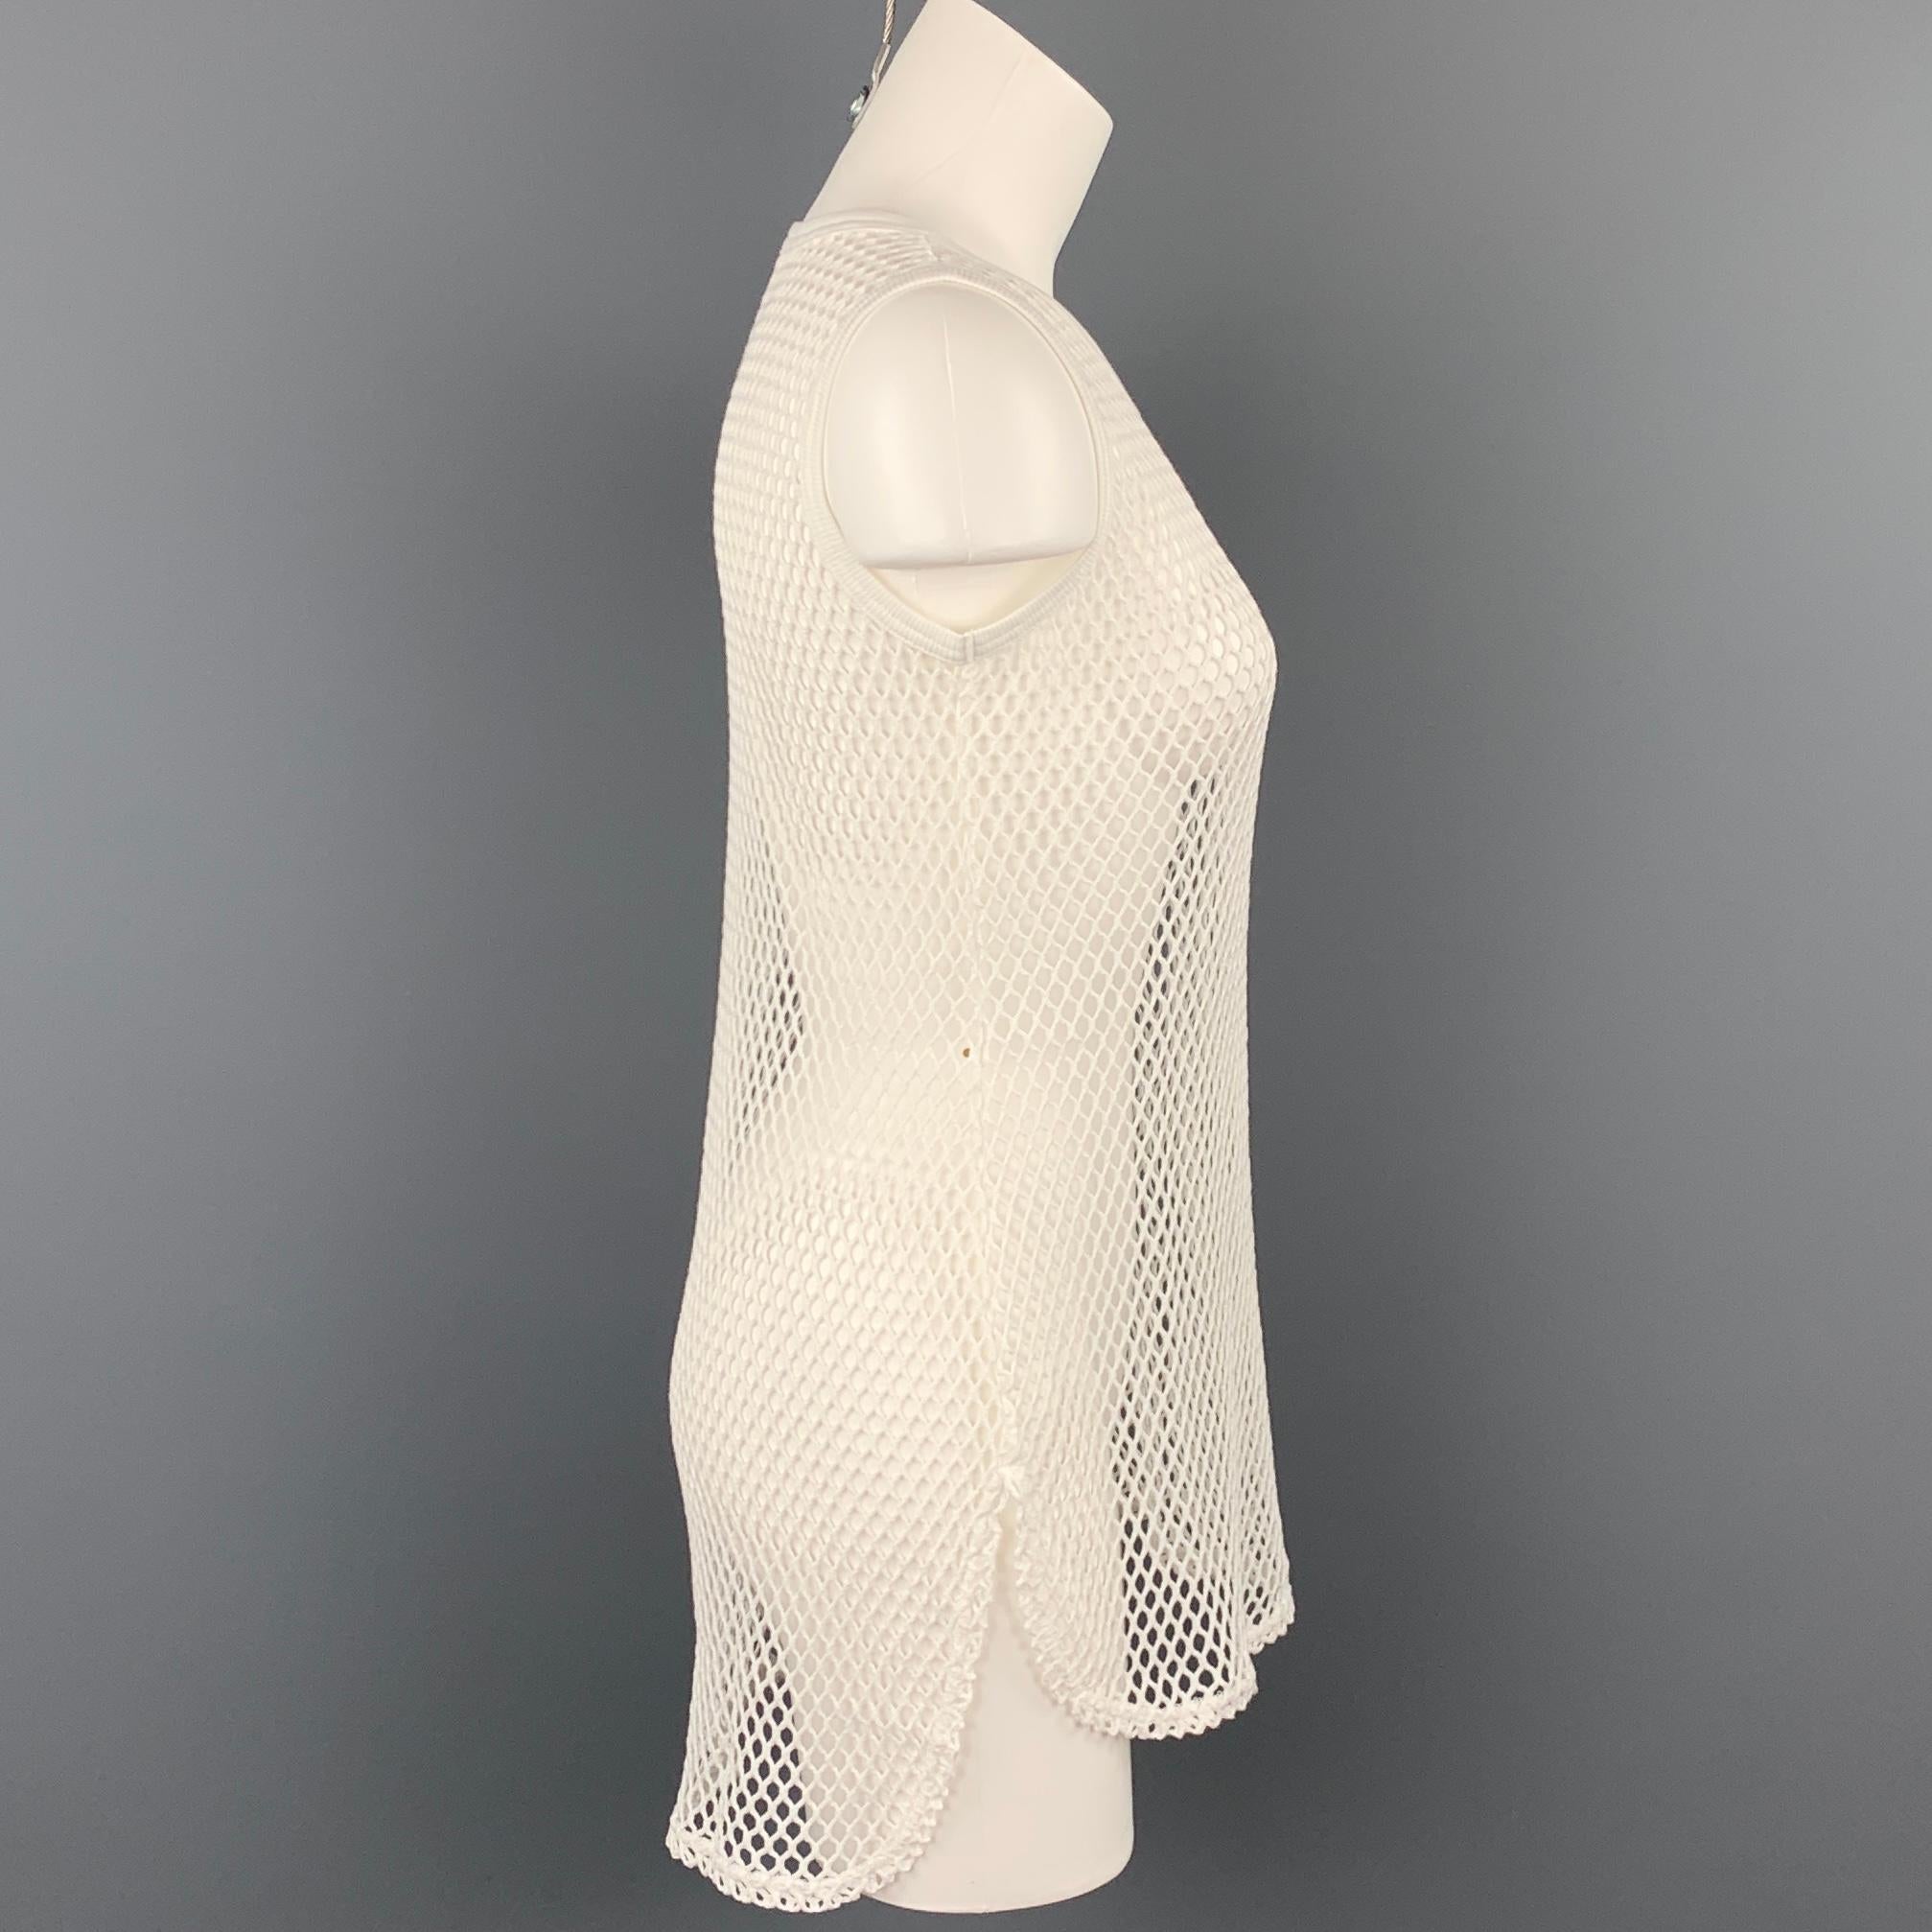 Y's by YOHJI YAMAMOTO tank top comes in a white mesh cotton featuring a sleeveless style and a crew-neck. Made in Japan.

New With Tags. 
Marked: 2
Original Retail Price: $380.00

Measurements:

Shoulder: 13.5 in.
Bust: 30 in.
Length: 28.5 in. 